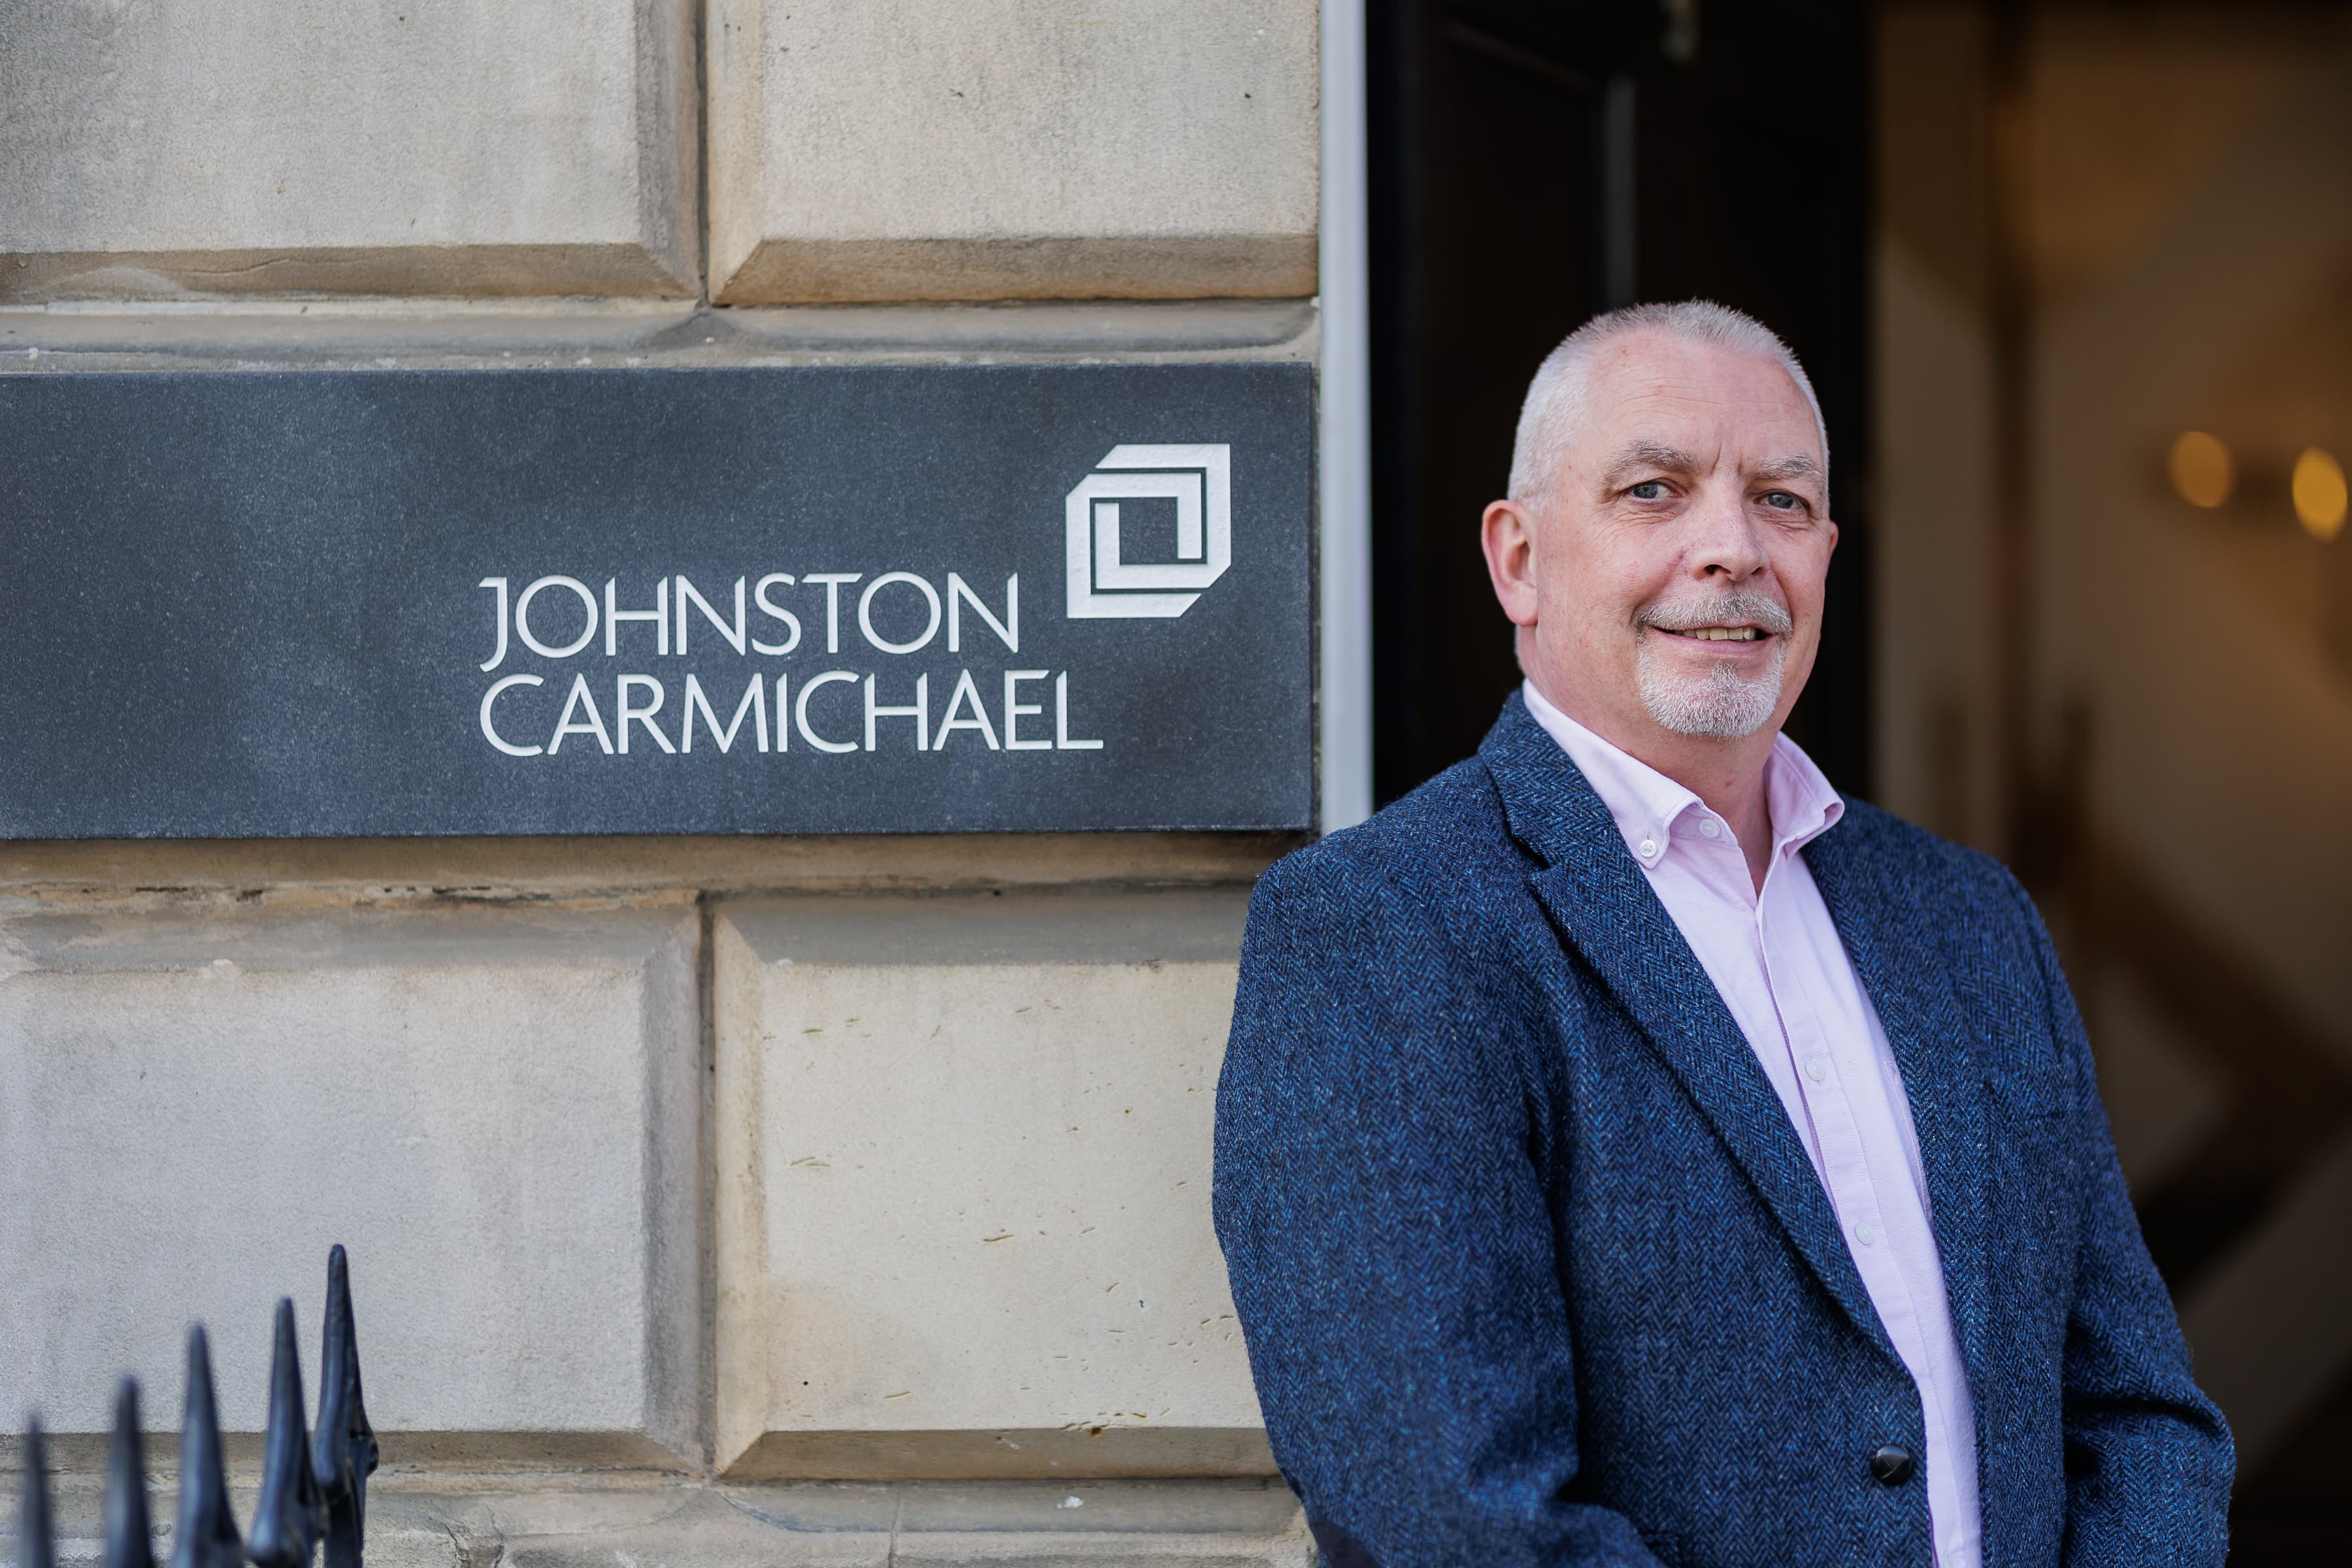 Keith Hamilton promoted to general counsel at Johnston Carmichael